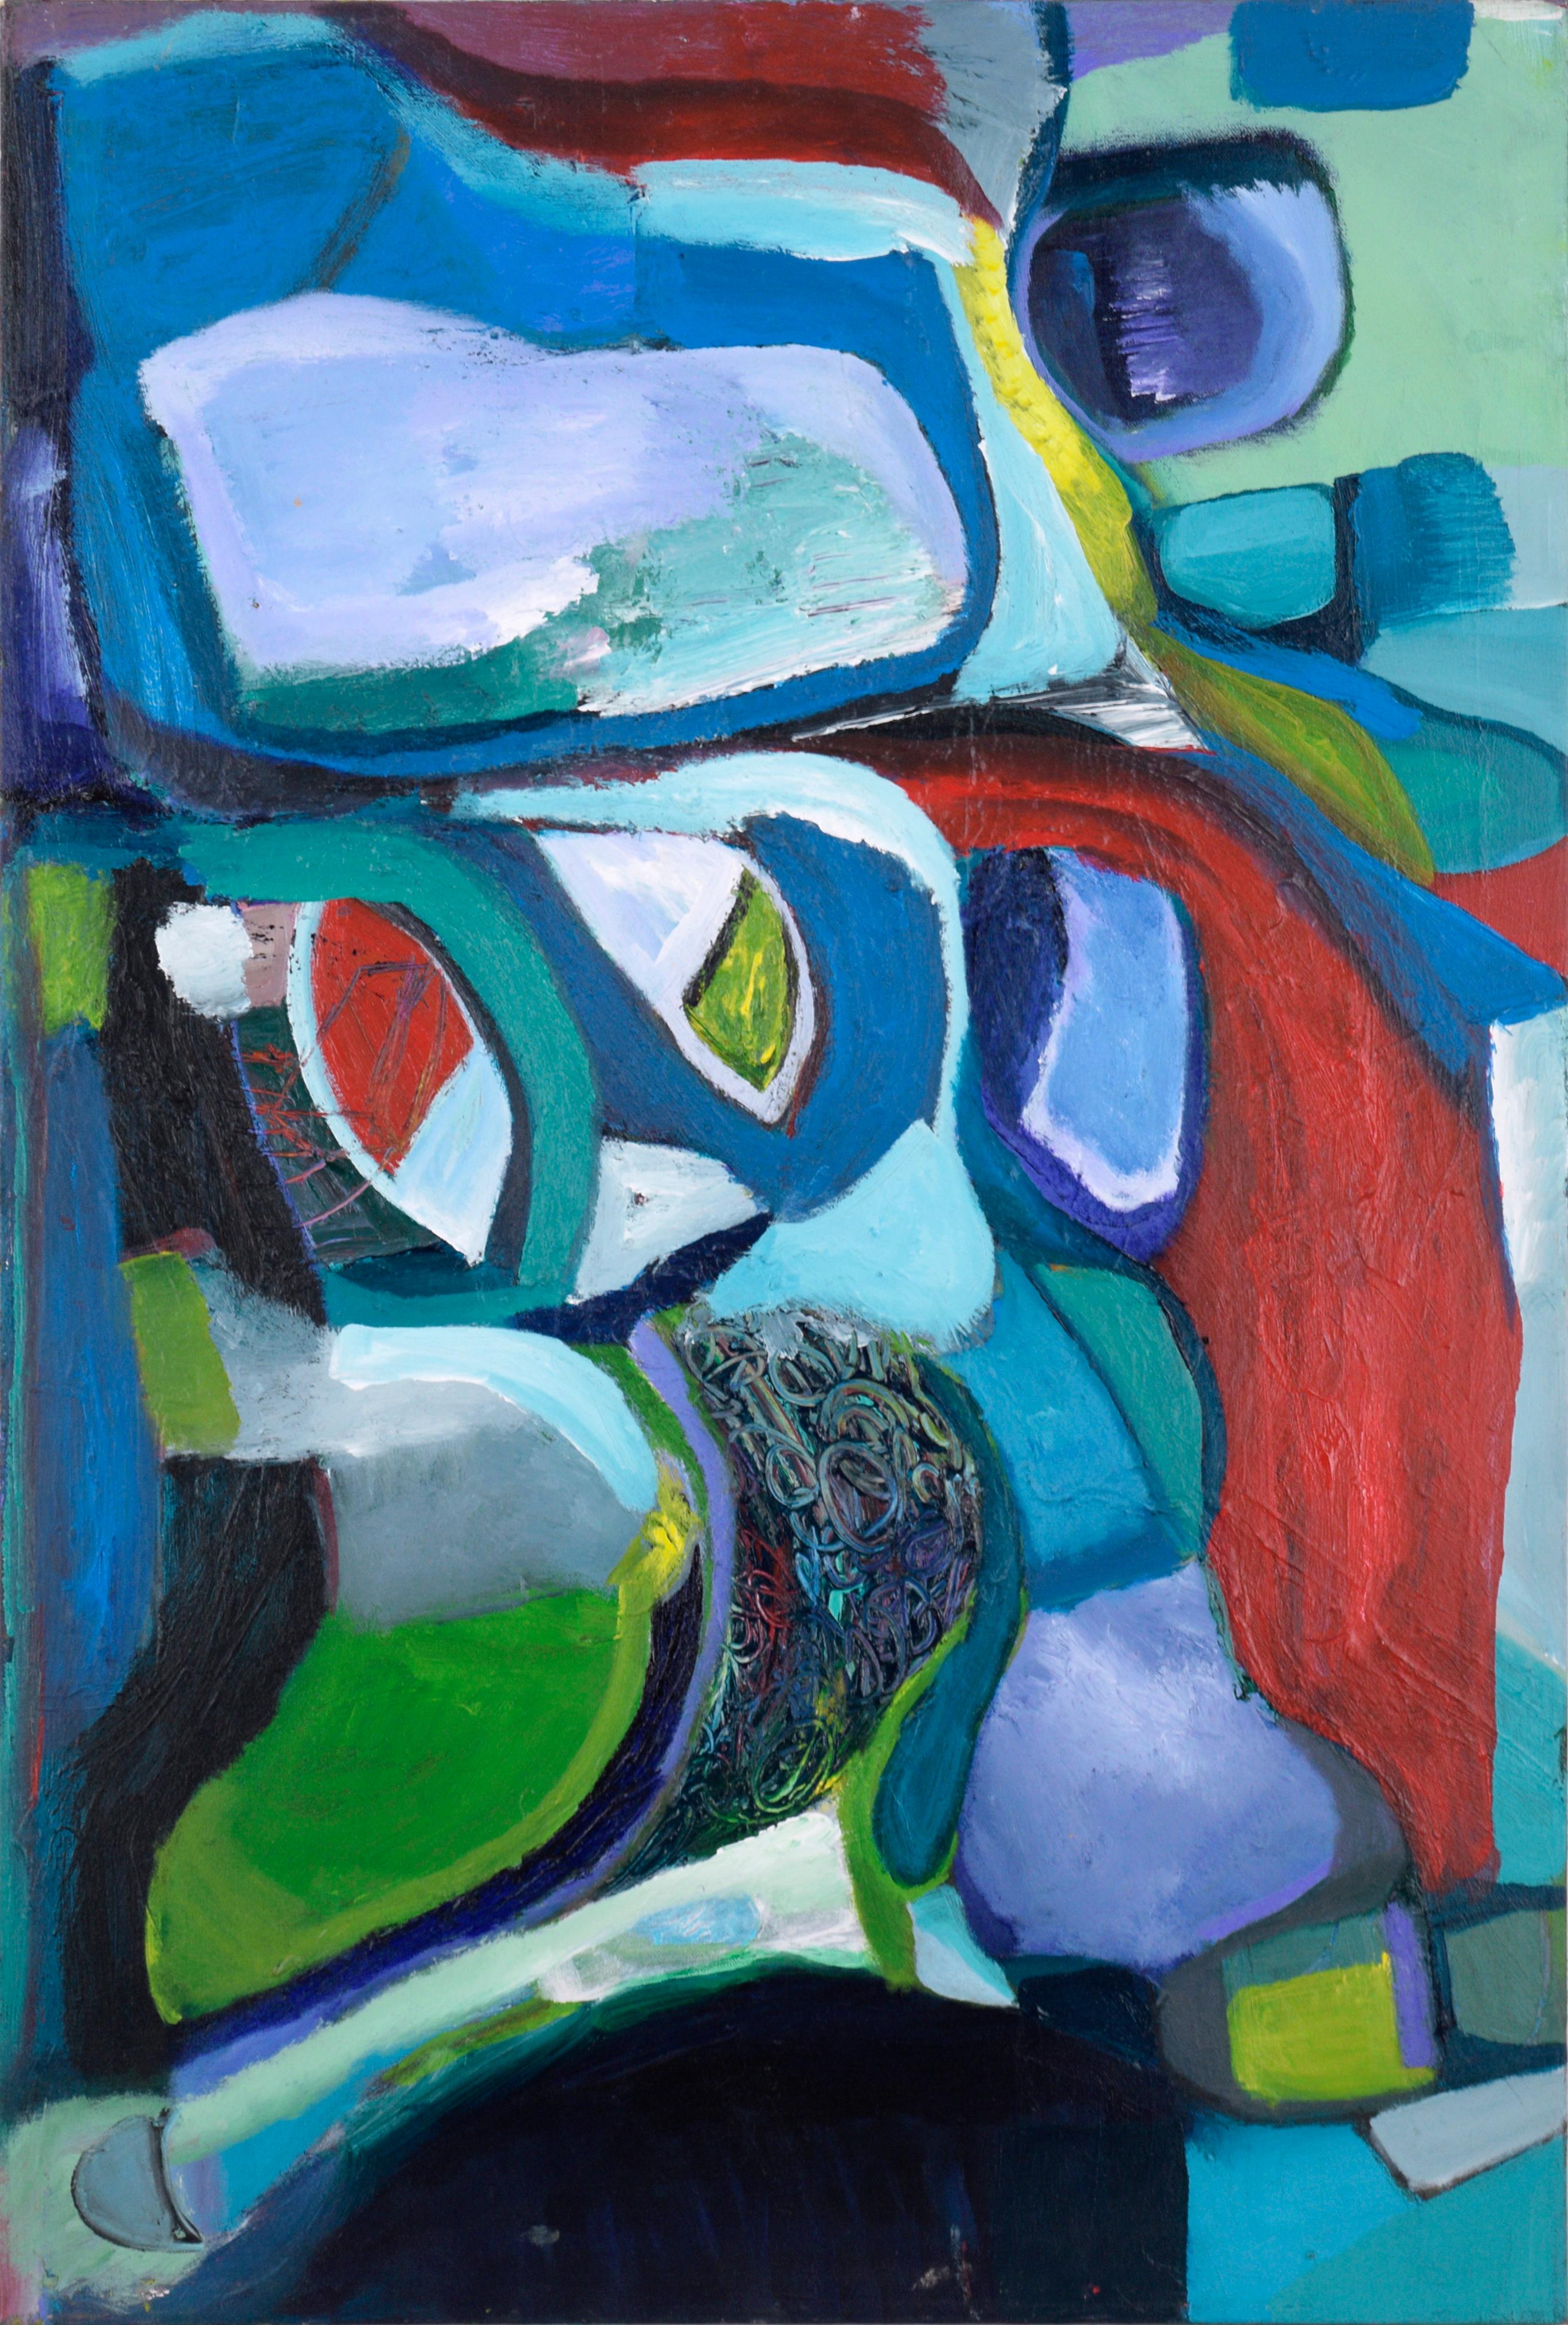 Catherine Freethy Abstract Painting - Multicolor Abstract Expressionist with Red, Blue, & Green